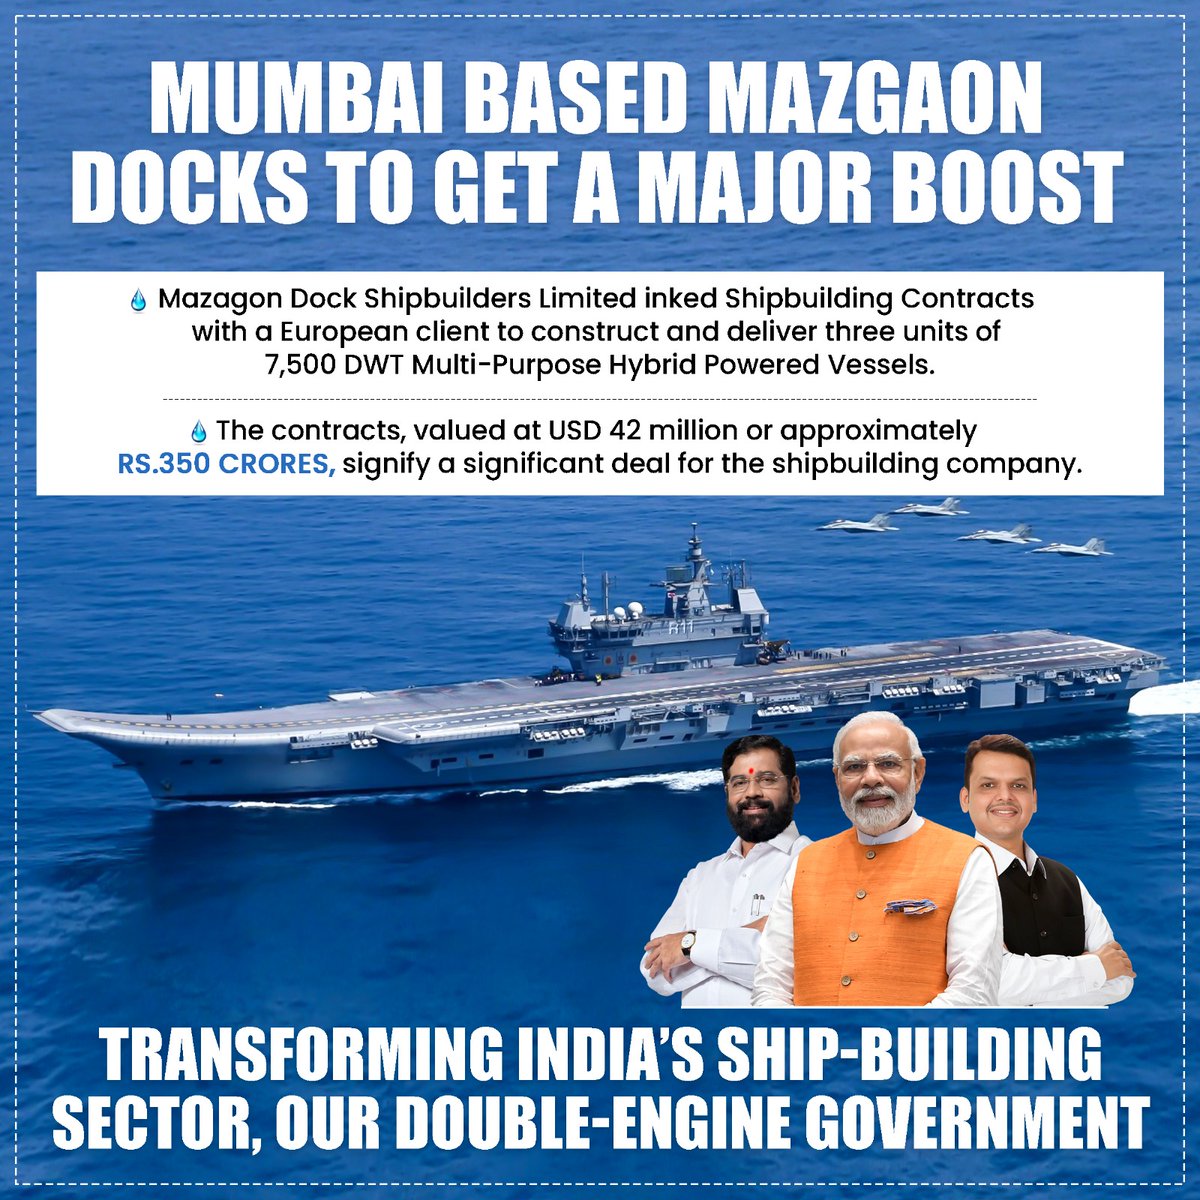 An exciting journey ahead for Mazagon Docks! Contracts worth USD 42 million pave the way for groundbreaking vessels and economic growth. Mumbai's maritime legacy thrives under CM Eknath Shinde's governance.